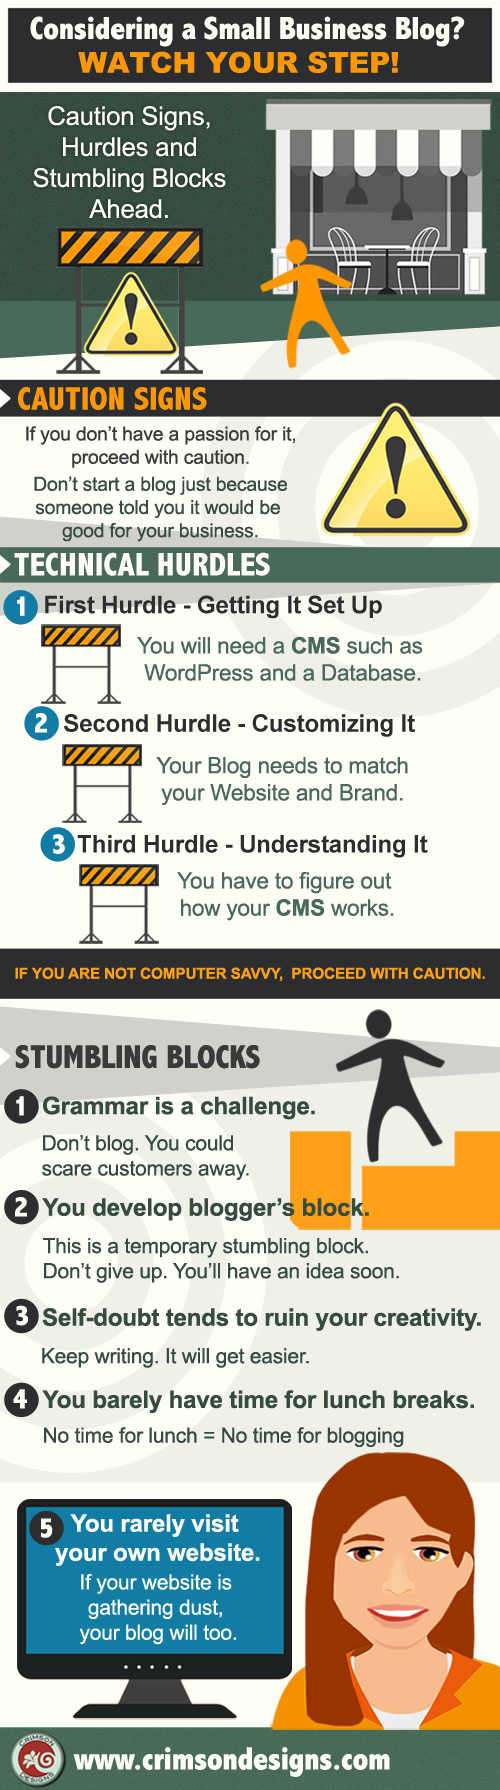 Considering a Small Business Blog - Infographic